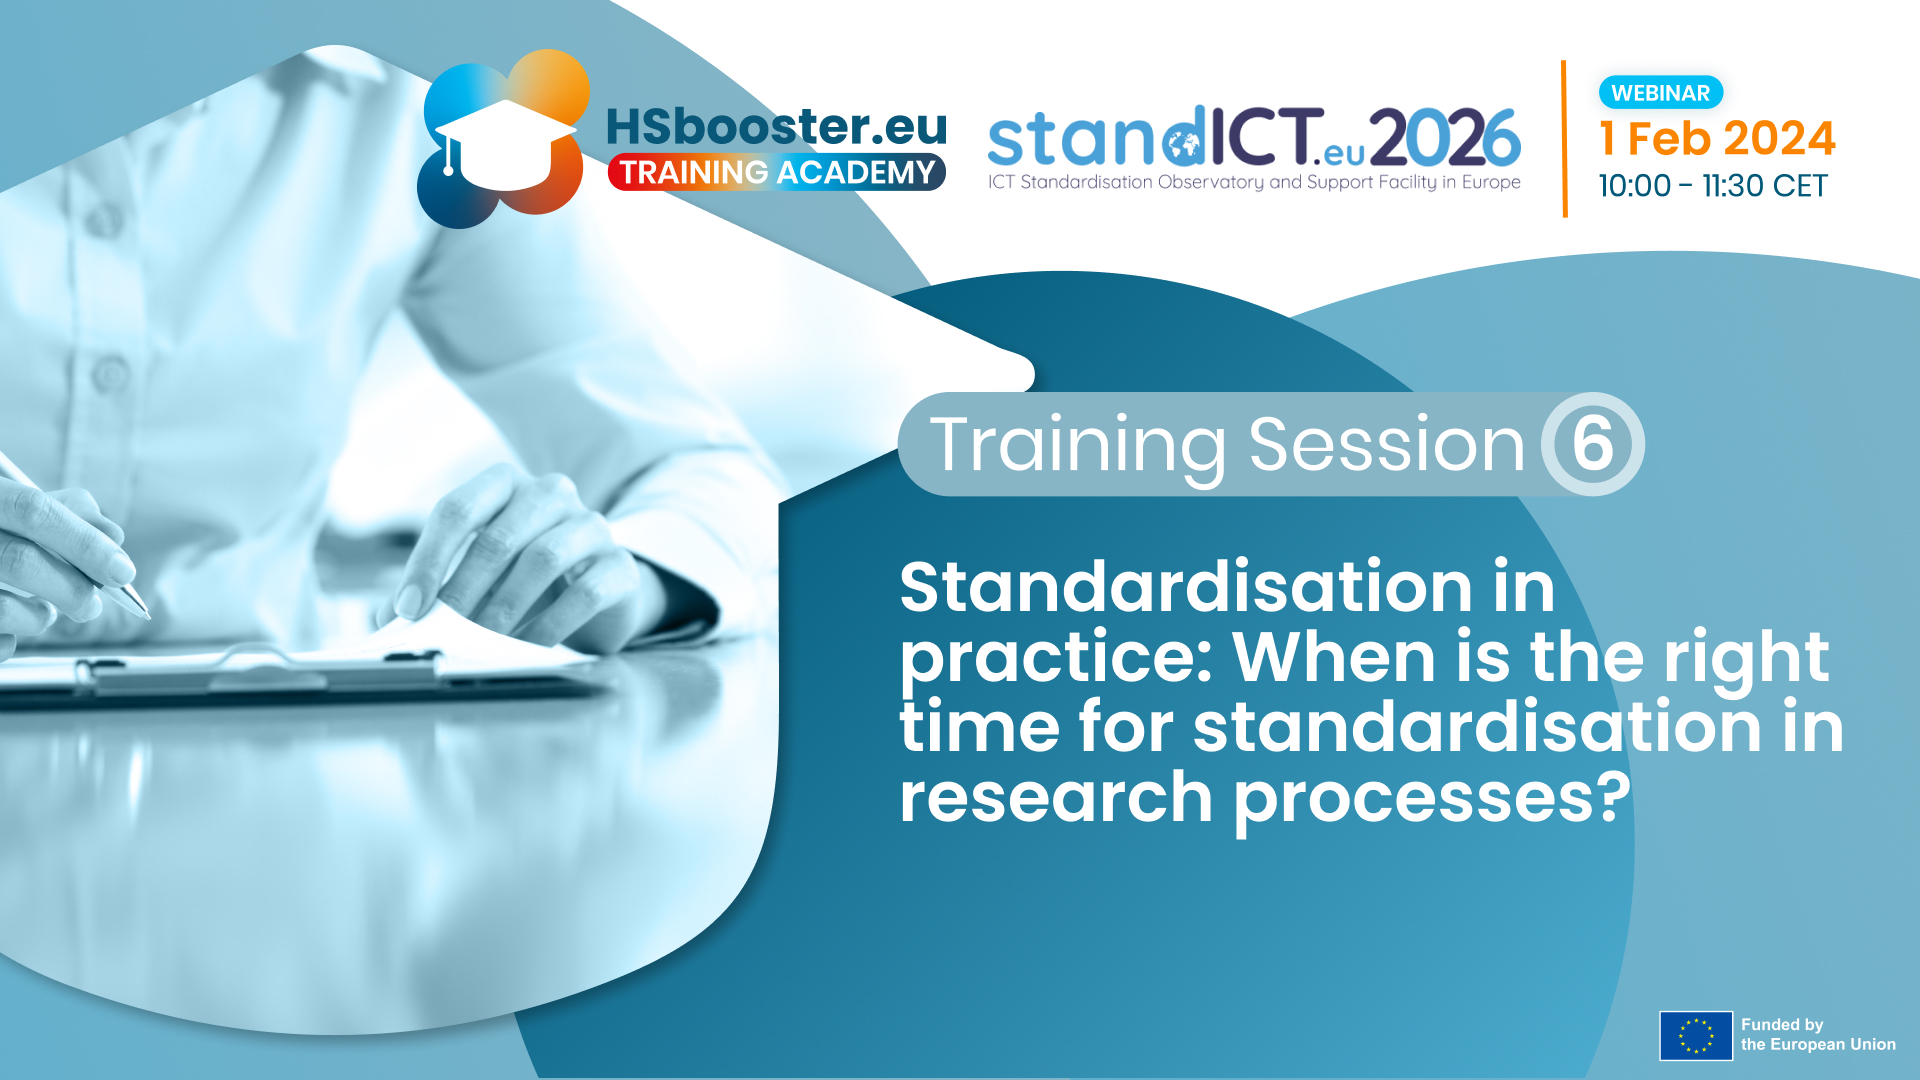 Standardisation in practice: When is the right time for standardisation in research processes?